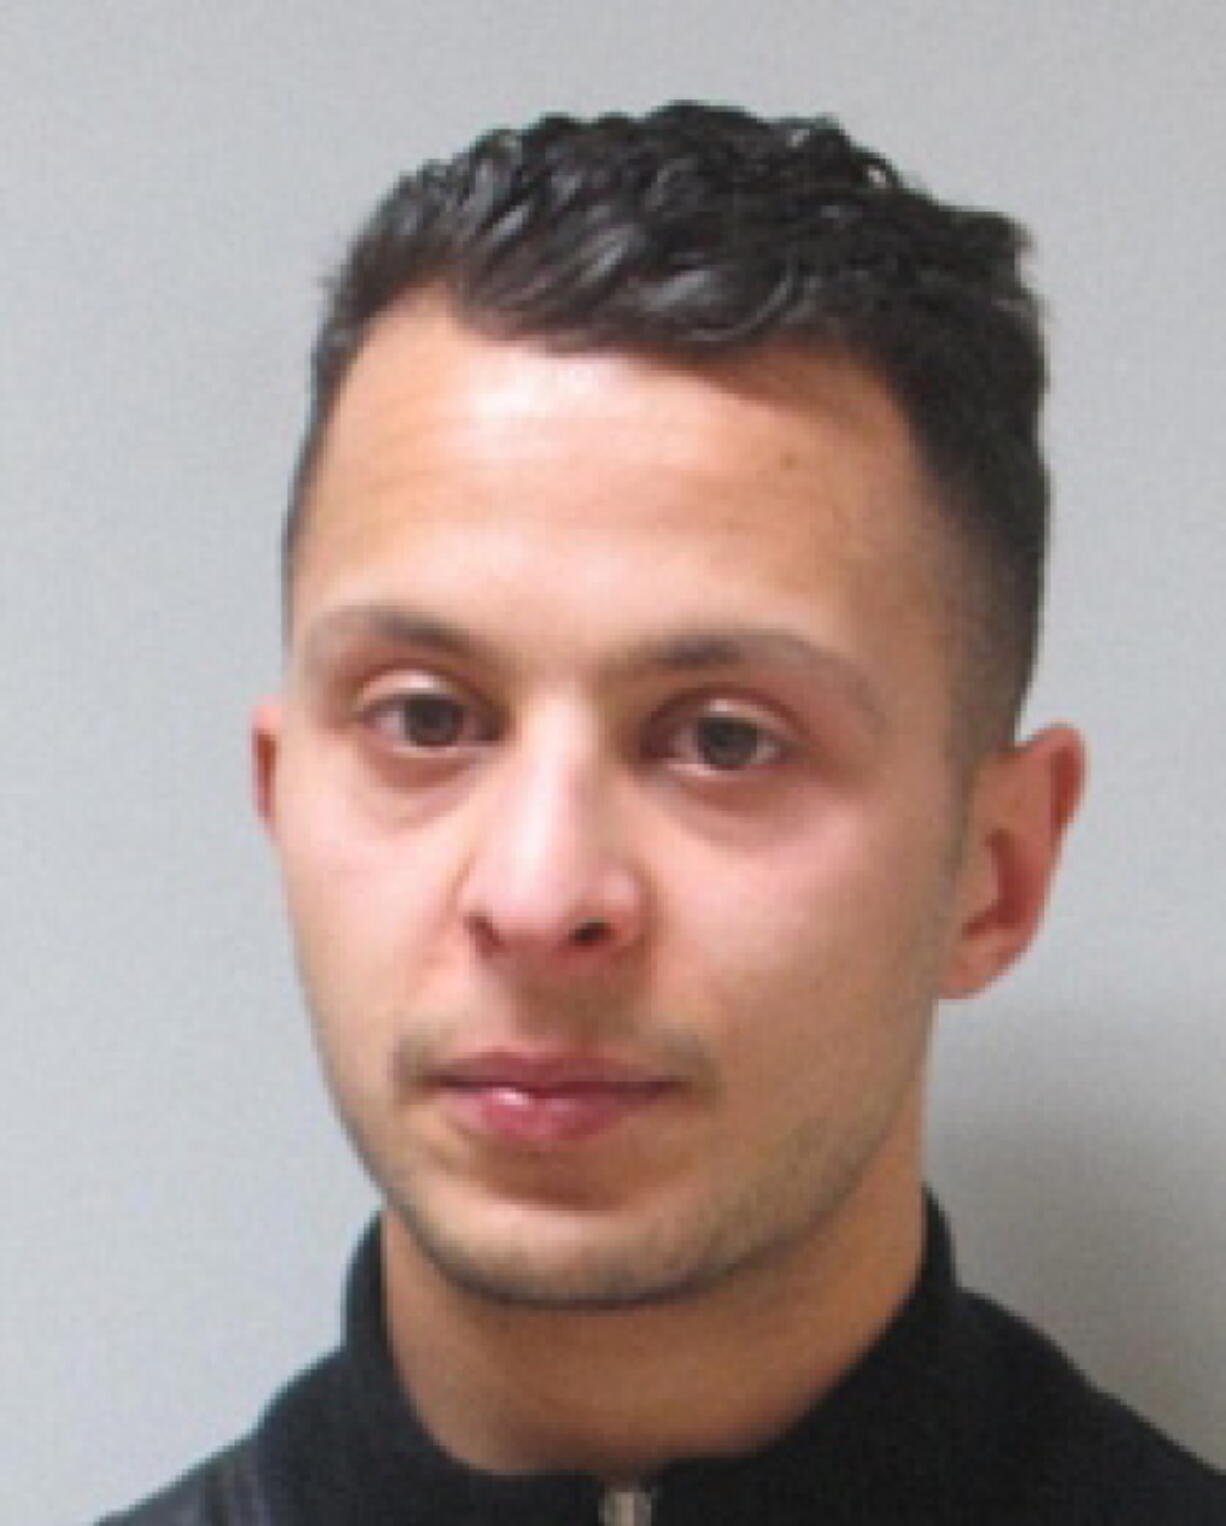 FILE - This is a an undated handout image made available by Belgium Federal Police of Salah Abdeslam who was wanted in connection to the attacks in Paris on Nov. 13, 2015. The last surviving suspect from the 2015 Paris attacks has told a court he felt "ashamed" after failing to detonate his suicide vest on the bloody night of Nov. 13.